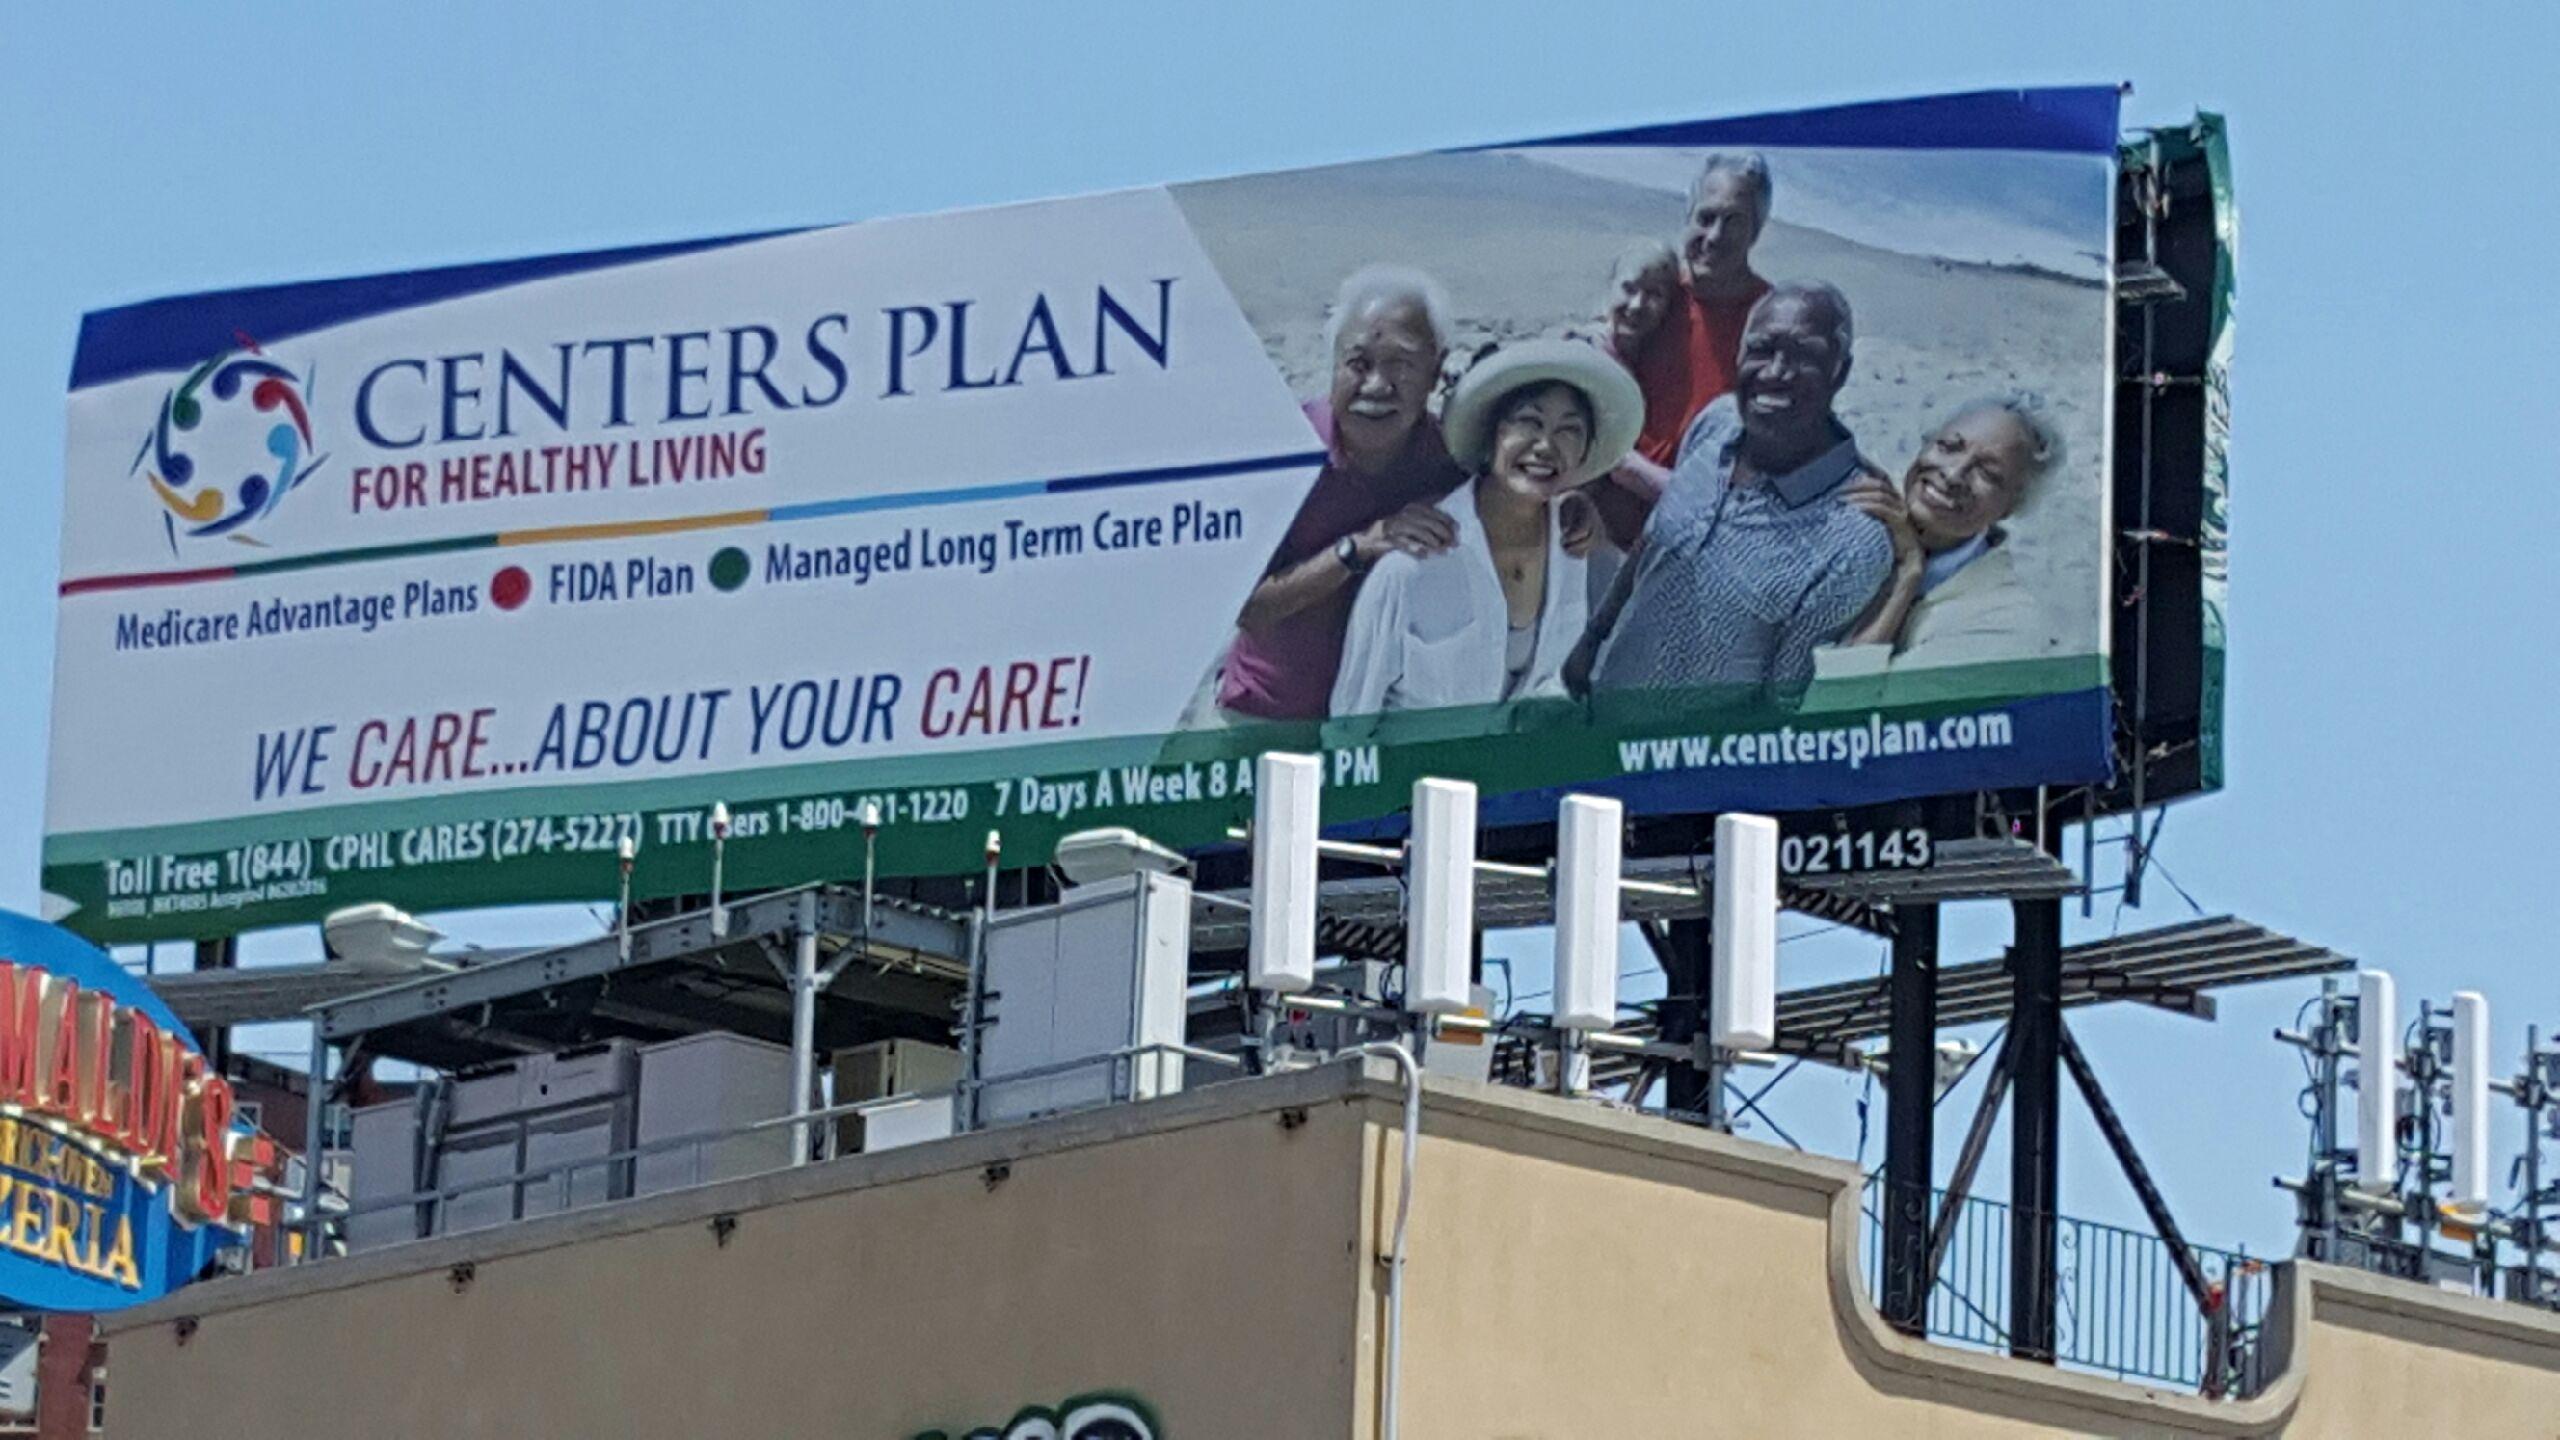 Go check out our new billboard this summer located in Coney Island!